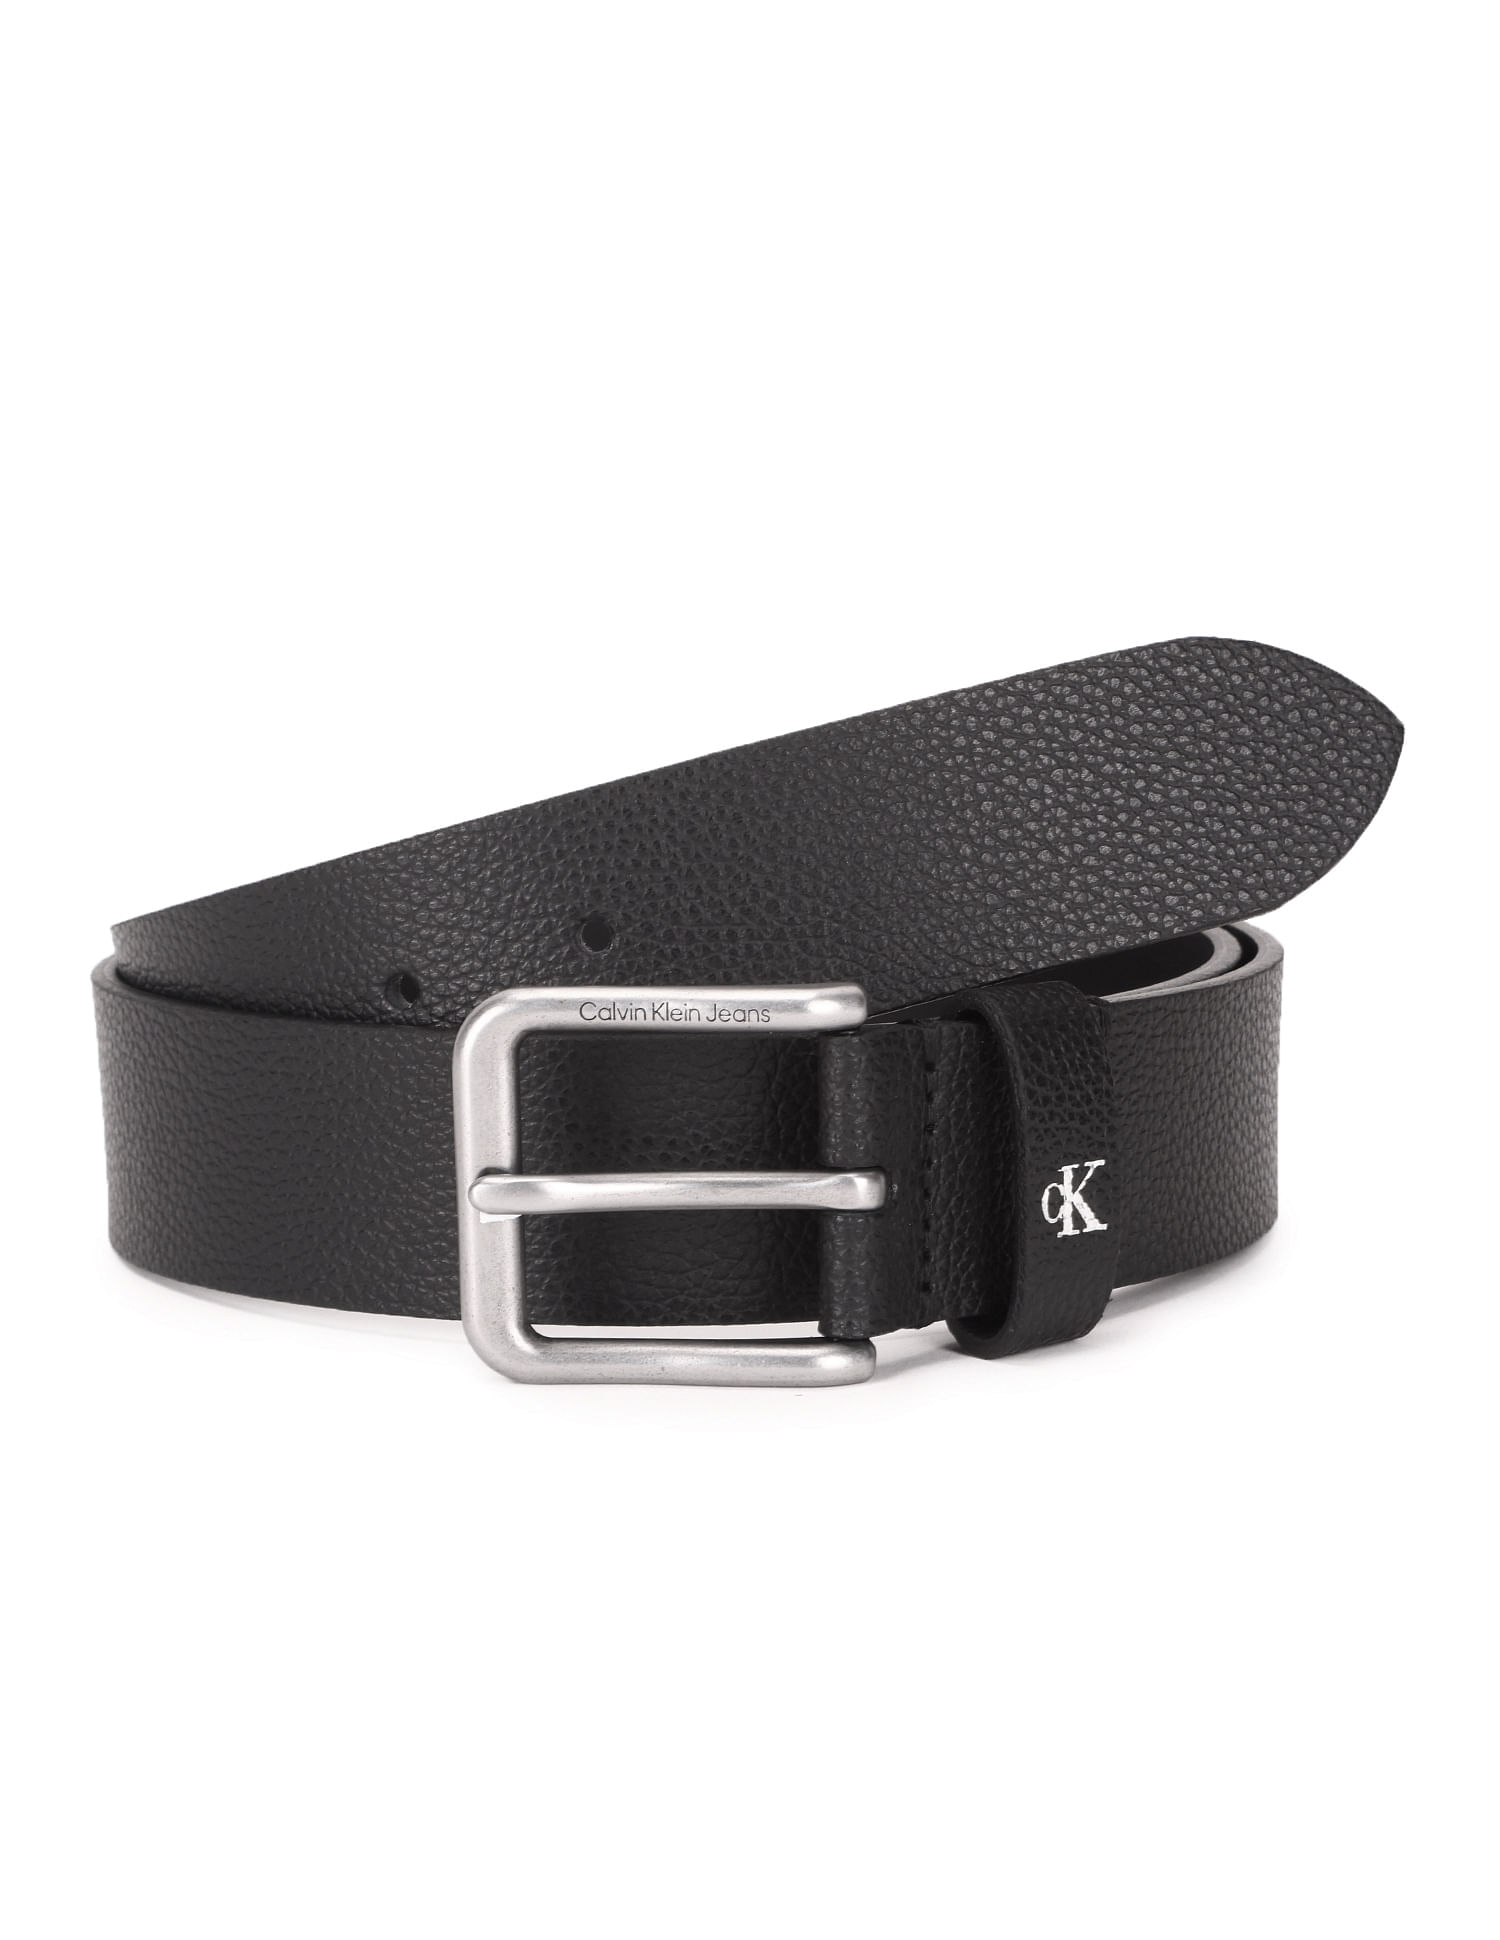 Jeans Klein Round Classic Buy Belt Calvin Leather